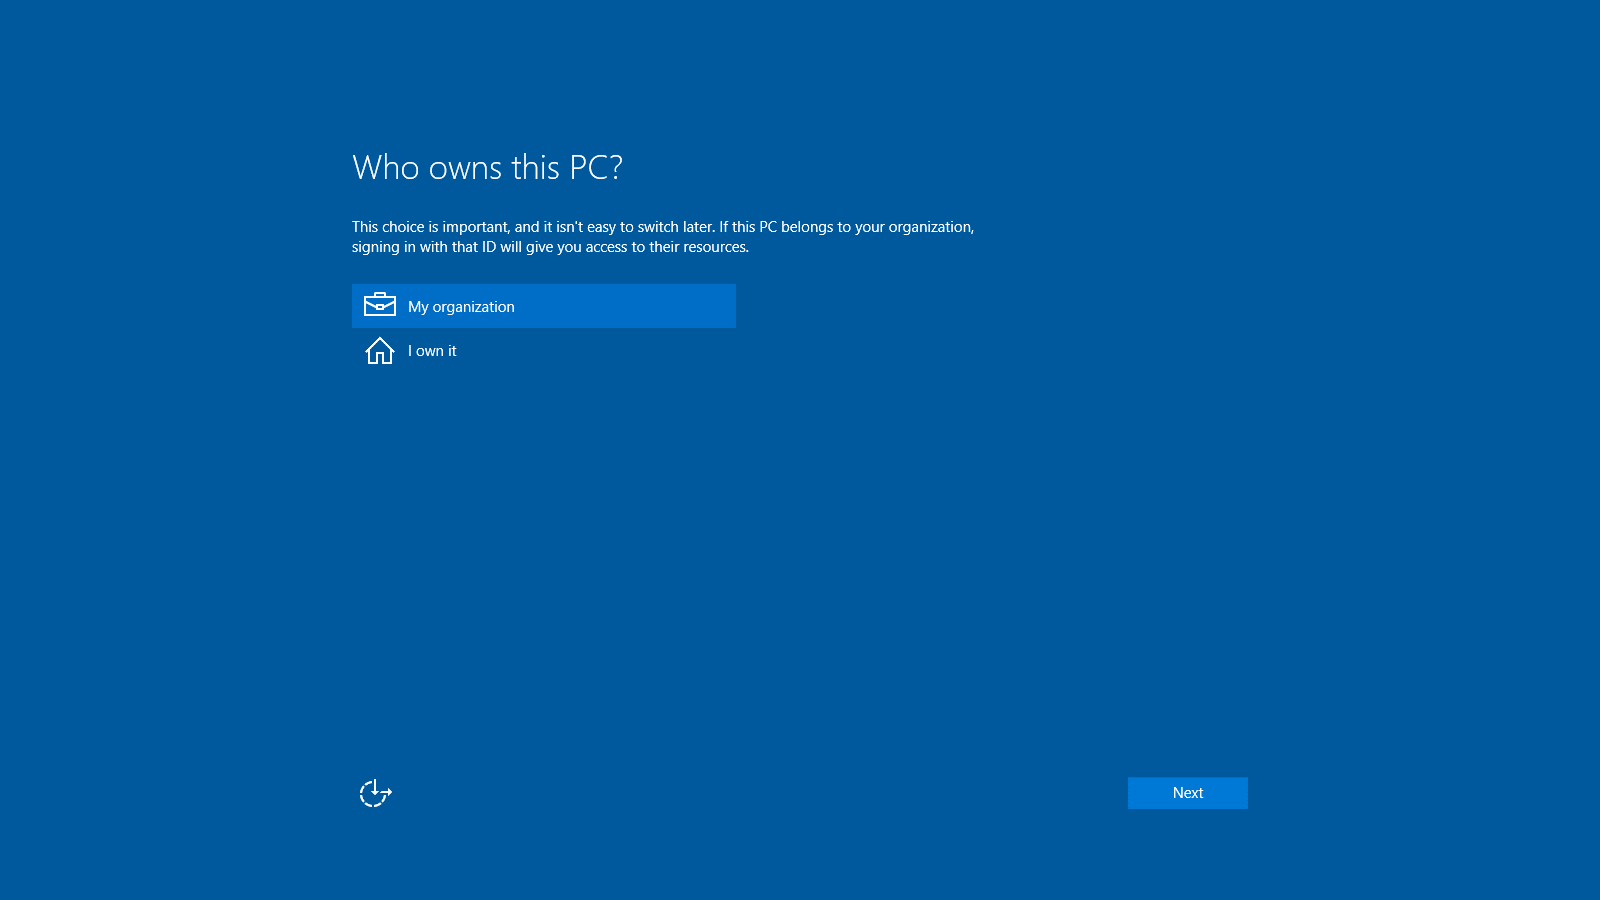 Who owns this PC? page in Windows 10 setup